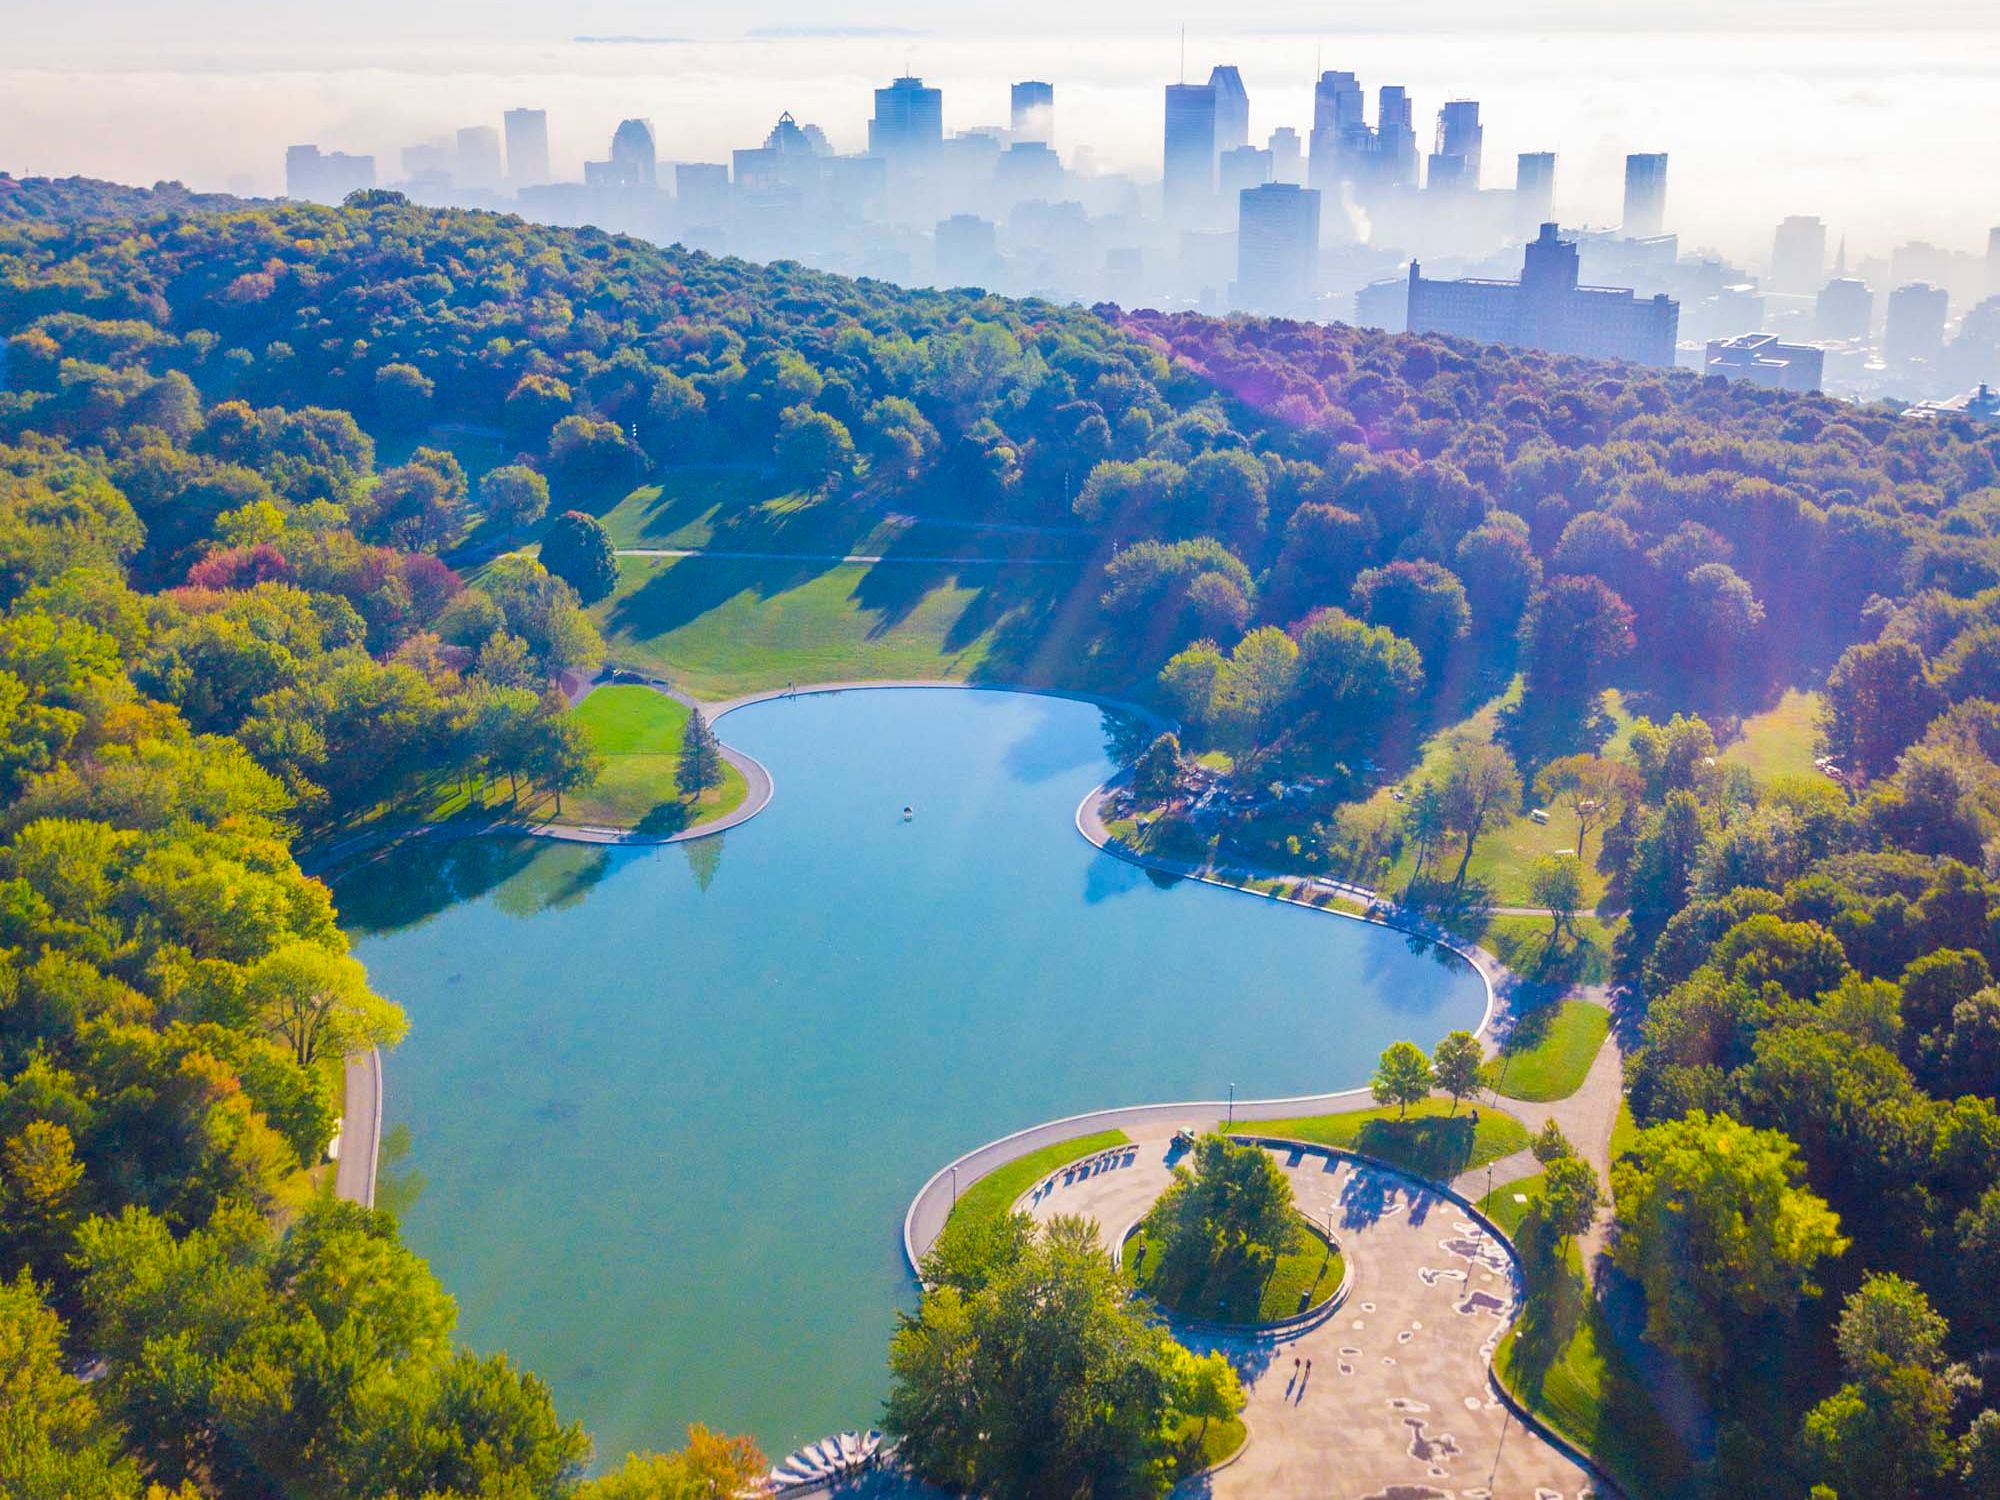 Walking Tour: Mount Royal and the Challenges it Faces